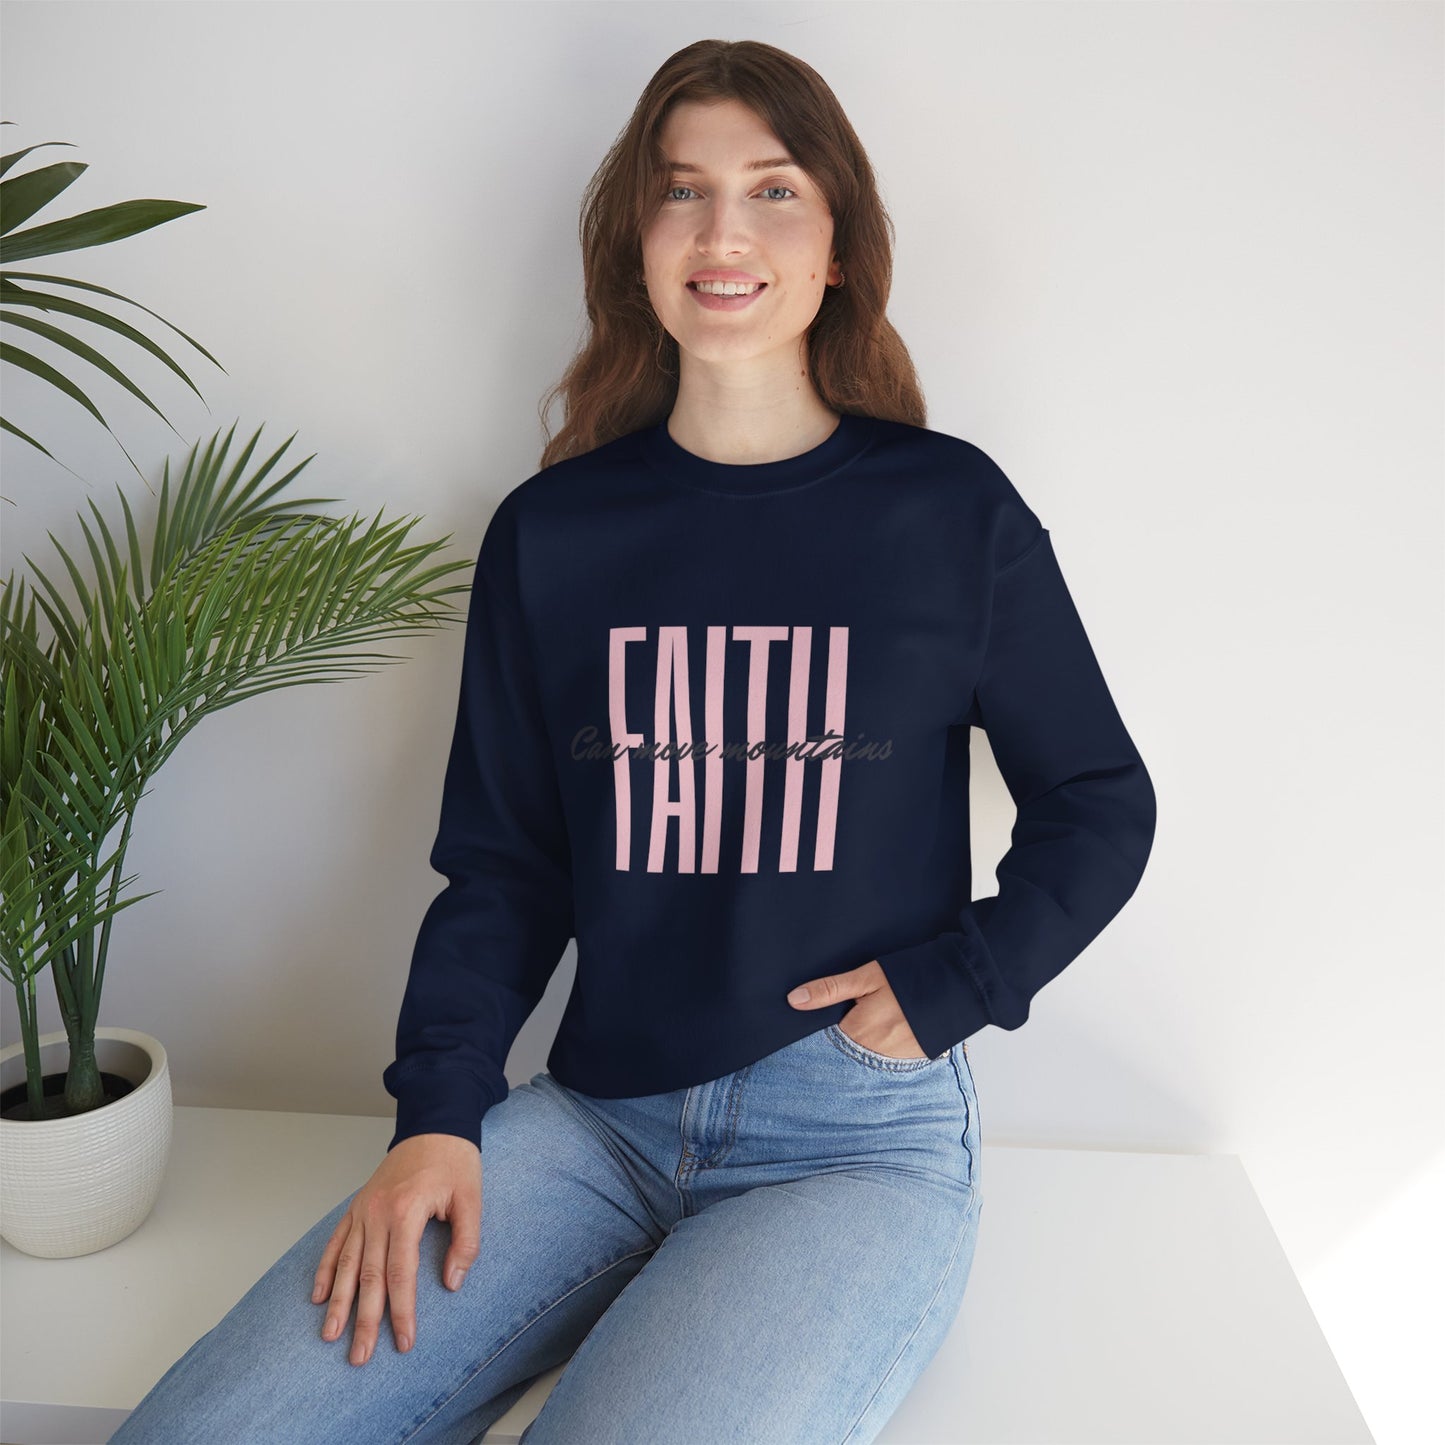 Scripture Crewneck For Women, Perfect For Religious Students, Teachers, Perfect Gift For Christian Faith, Catholic School Gift & Faithful Individuals